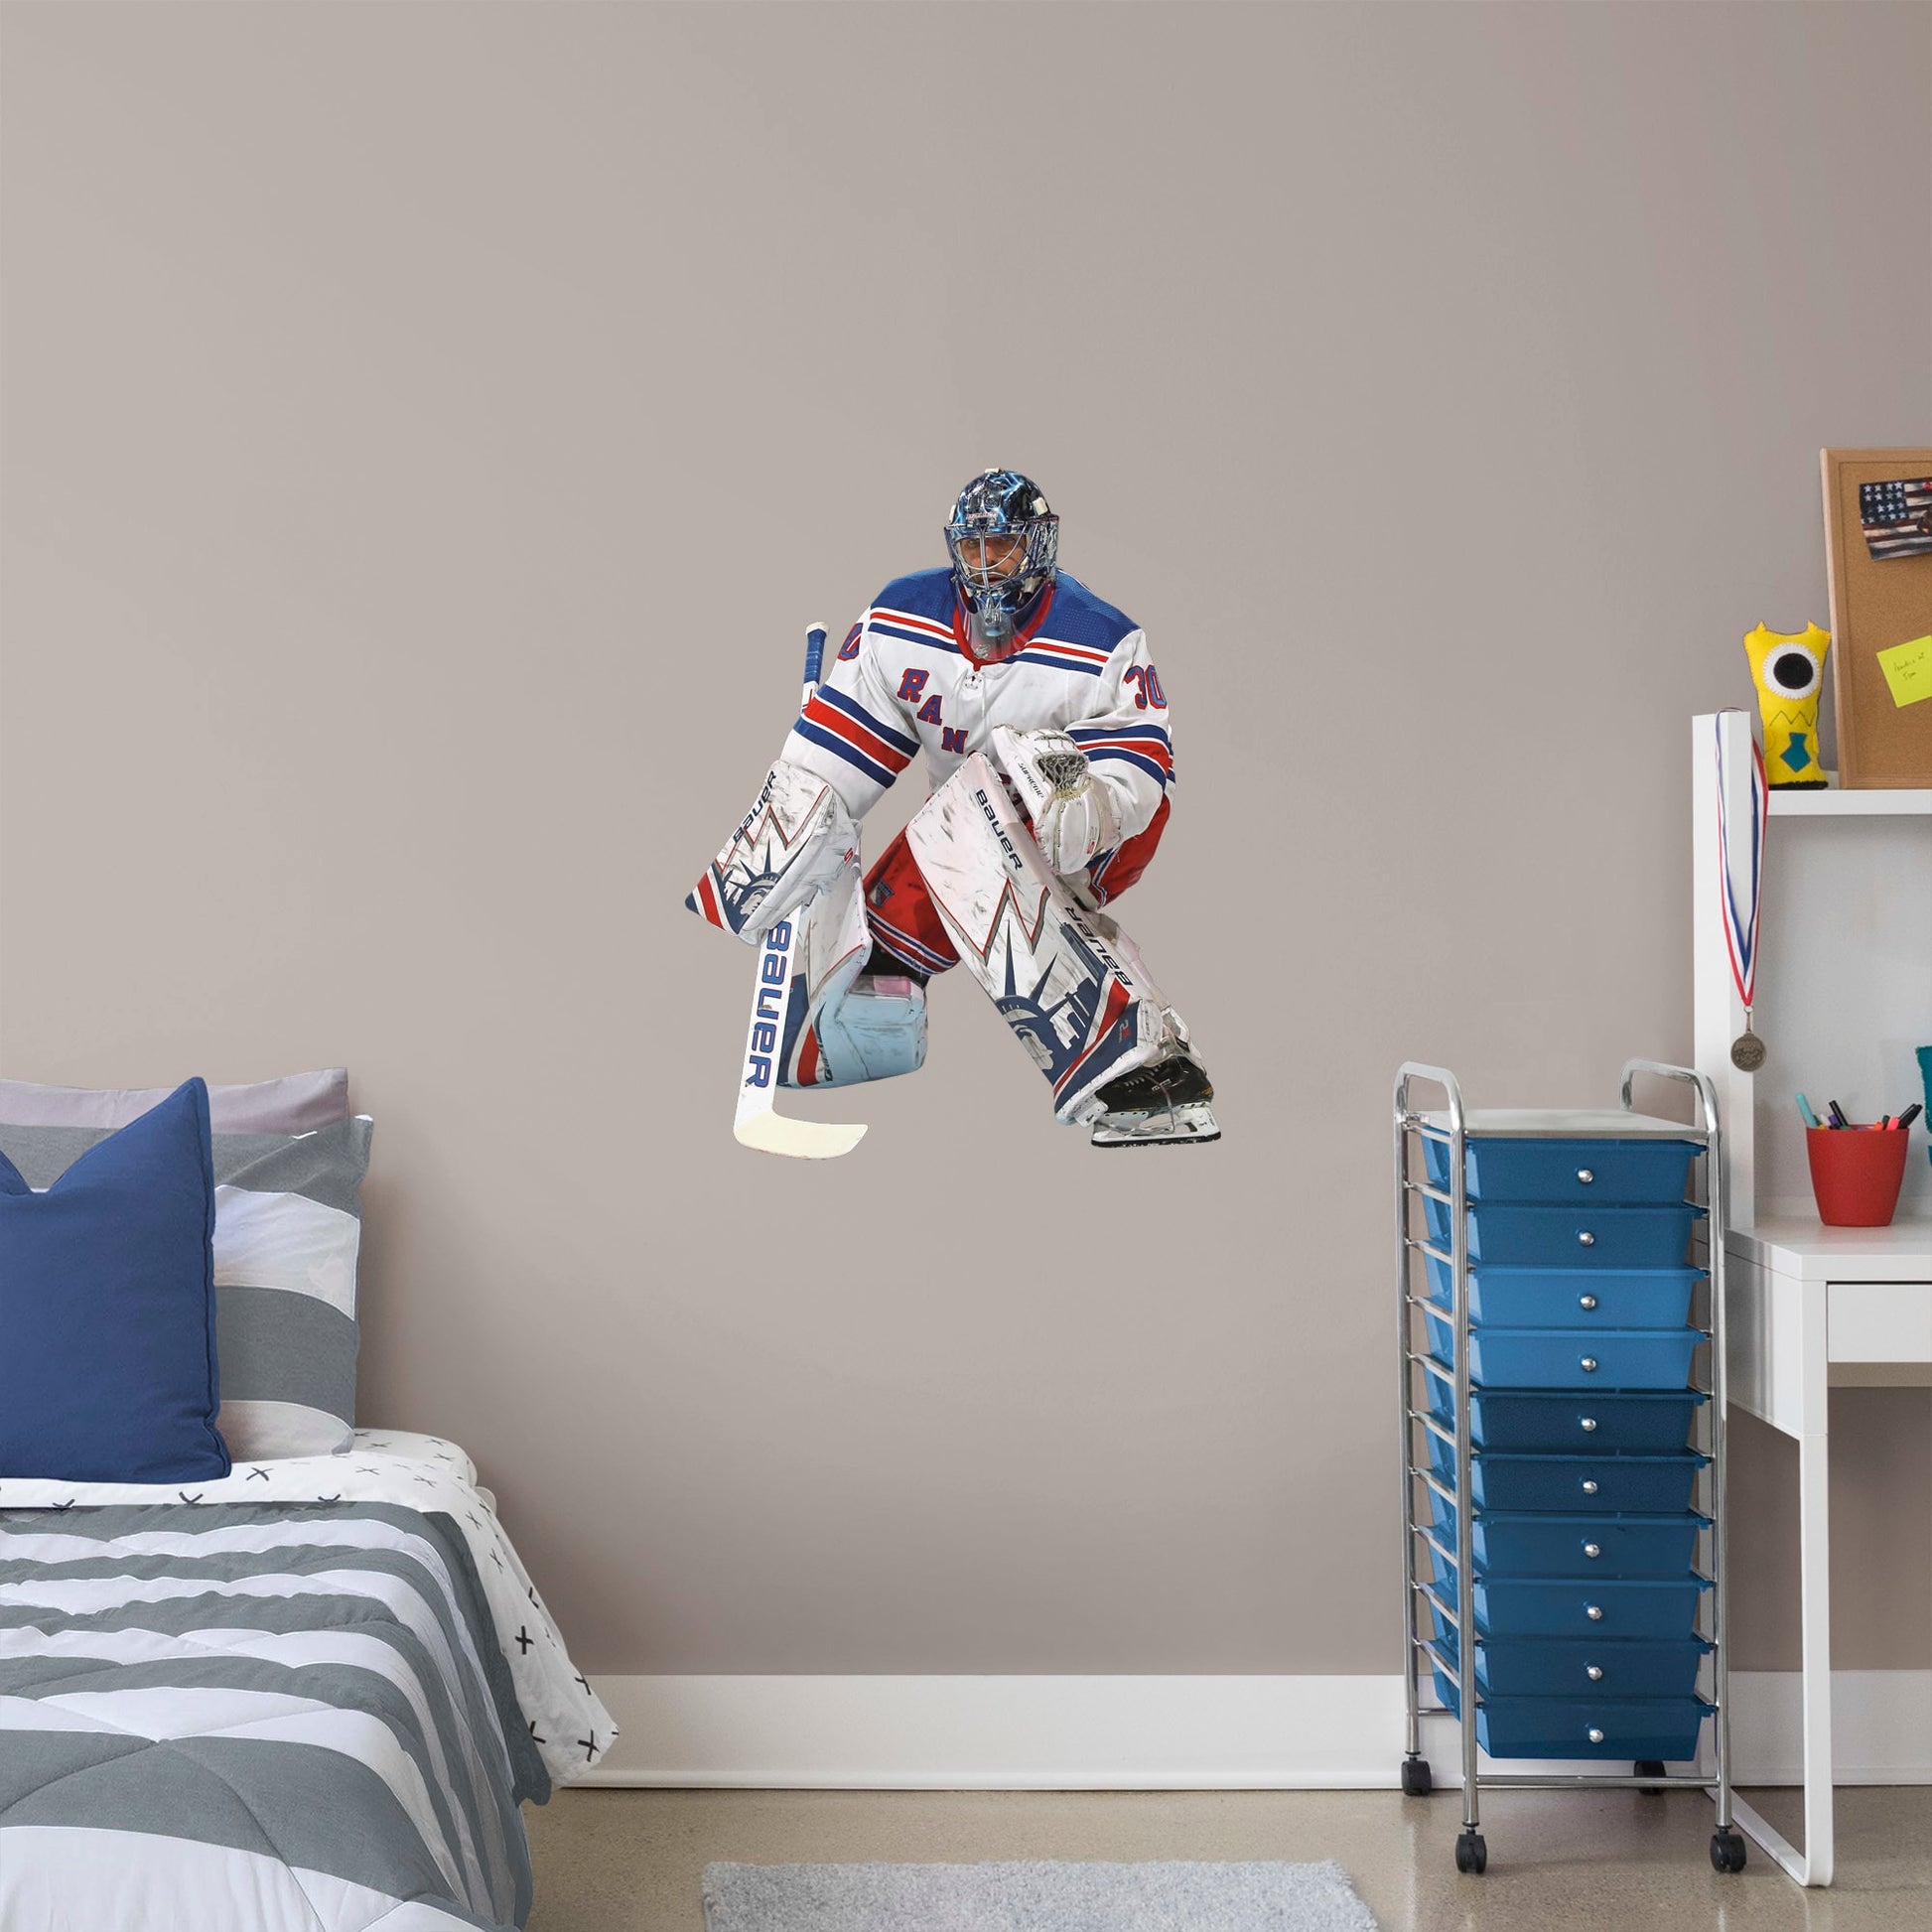 X-Large Athlete + 2 Decals (25"W x 32"H) Nothing gets past The King! Celebrate the impressive goaltending career of Henrik Lundqvist with this sturdy removable wall decal set depicting him poised to stop that puck. The gold-medal-winning hockey player looks great on any office or bedroom wall, and, unlike this goalie, the decal can be repositioned over time. It's also a great gift for anyone who appreciates Lundqvist's unique approach to tending goal!